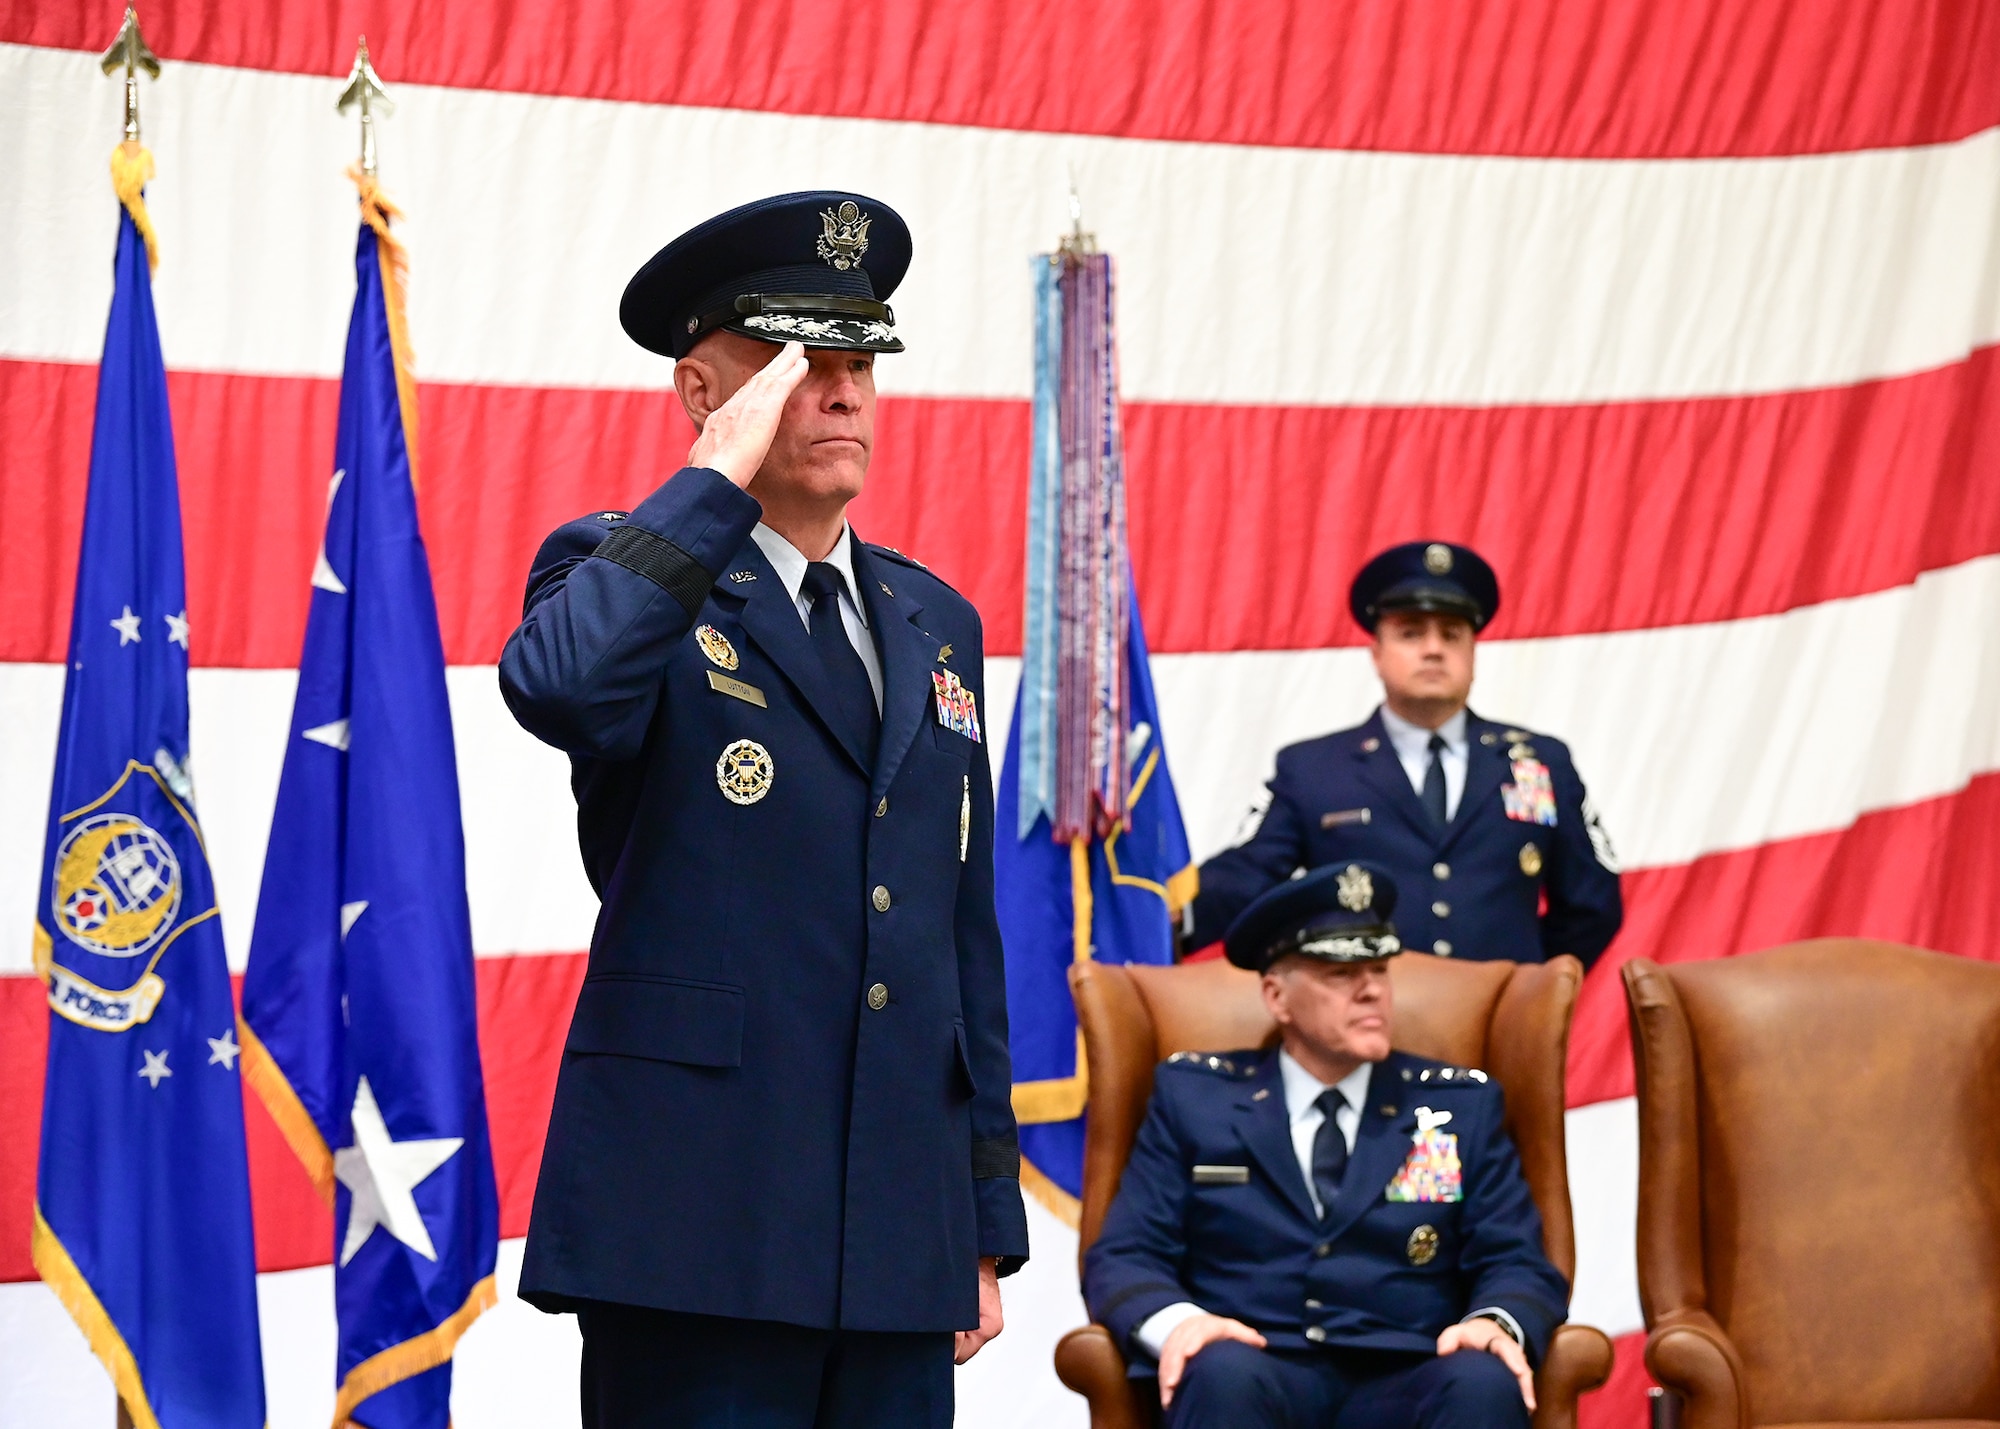 major general lutton renders his final salute to the troops of the 20th air force